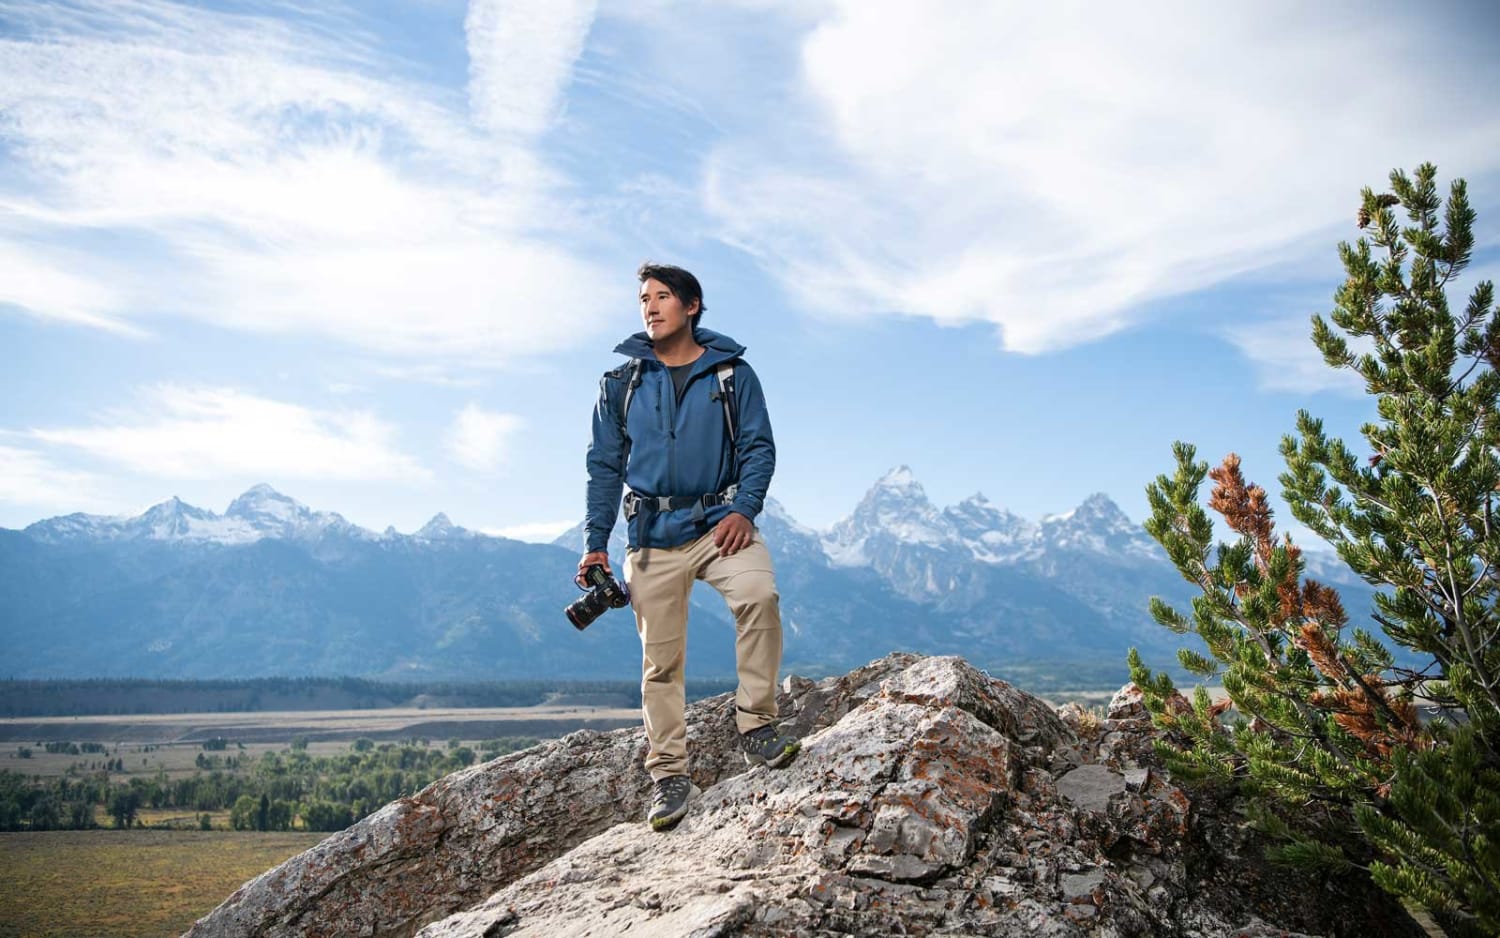 Renowned Photographer Jimmy Chin Shares His Tips For Adventure Photography